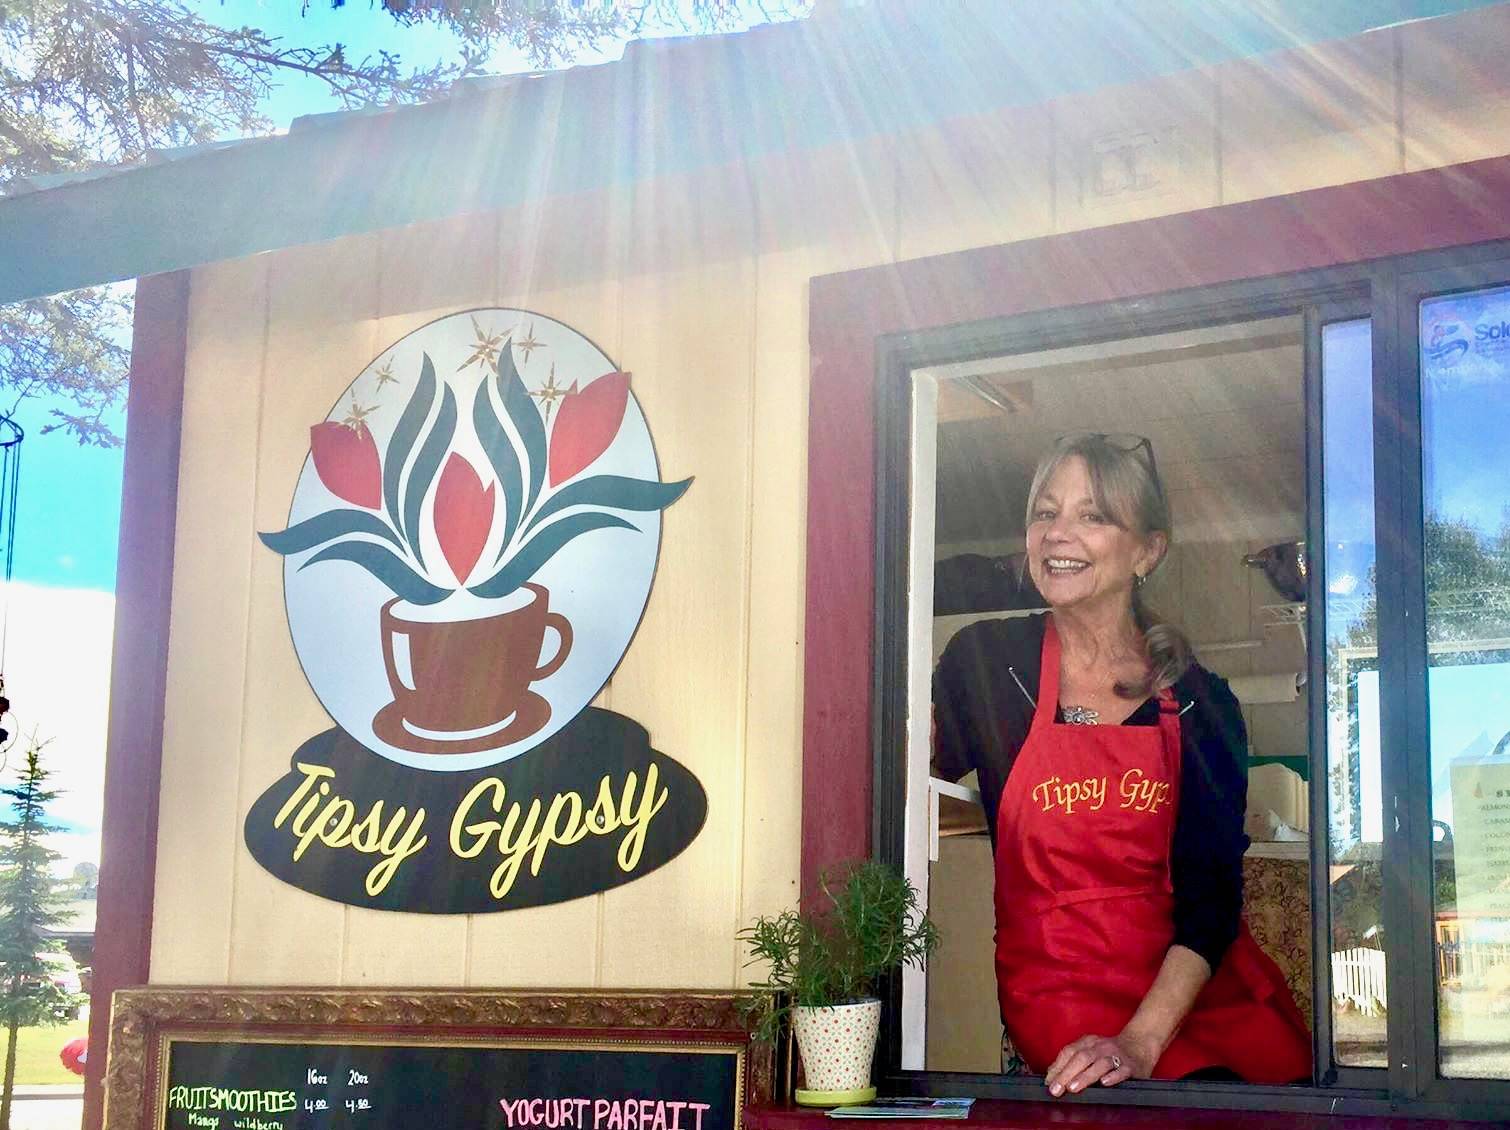 Diane Hooper opened TipsyGypsy Coffee Shop earlier this summer to pursue her passion for food and people on Friday, Aug. 3, 2018 in Soldotna, Alaska. (Phot by Victoria Petersen/Peninsula Clarion)